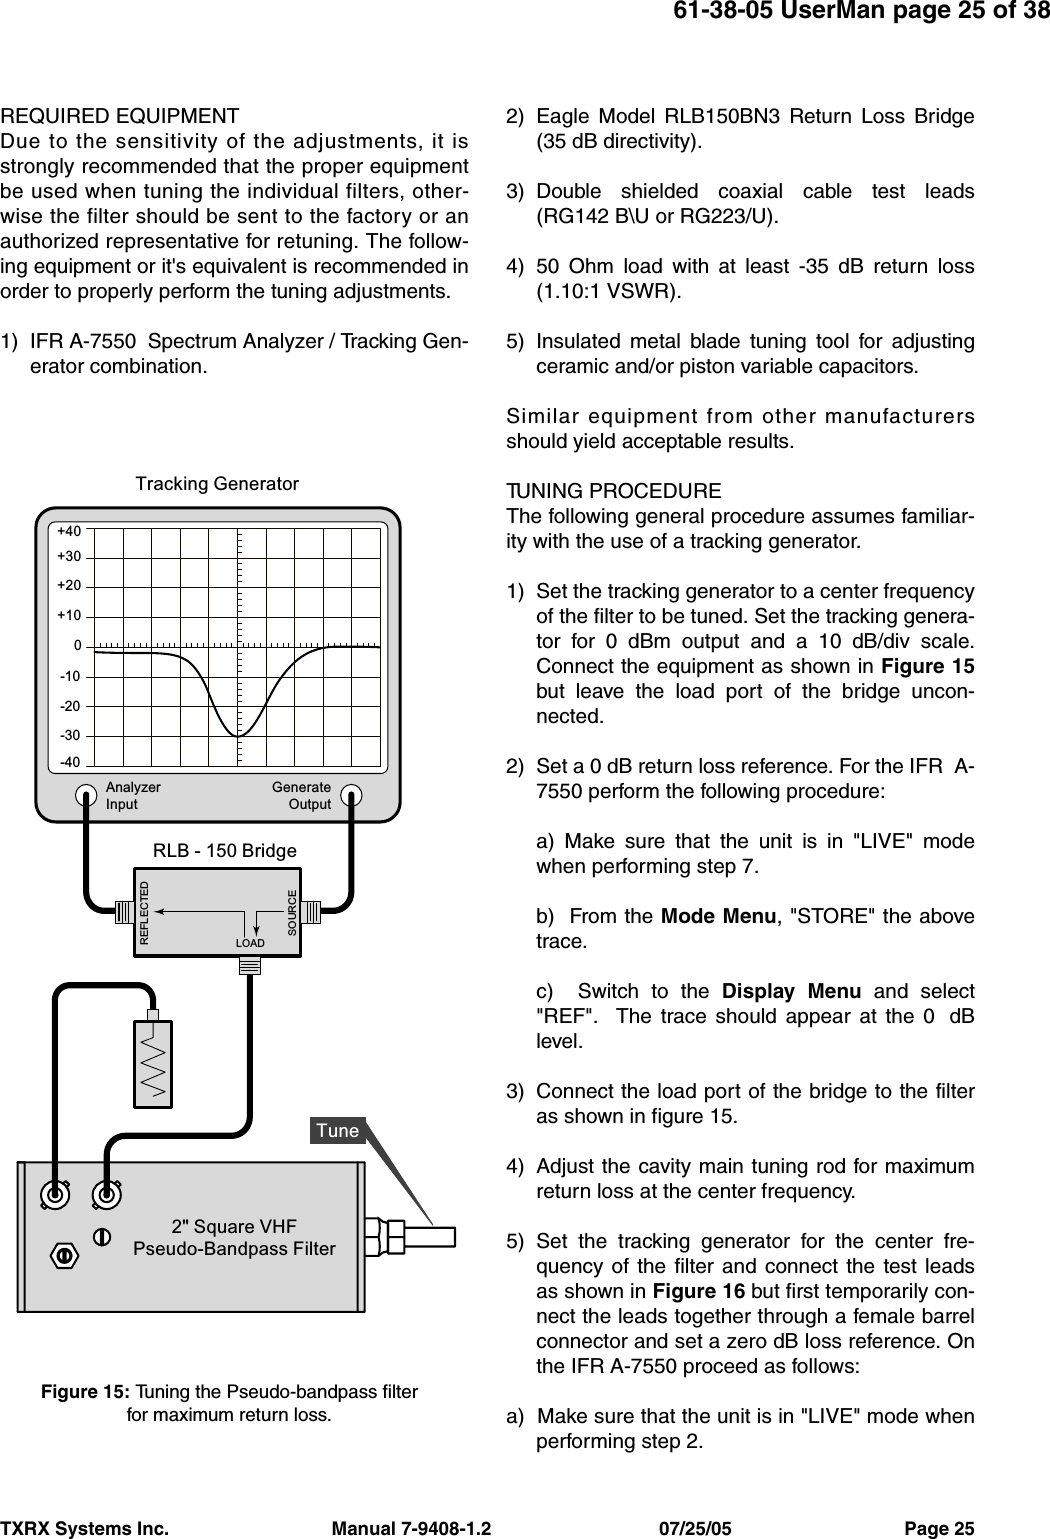 TXRX Systems Inc.                                Manual 7-9408-1.2                                 07/25/05                                  Page 2561-38-05 UserMan page 25 of 38REQUIRED EQUIPMENTDue to the sensitivity of the adjustments, it isstrongly recommended that the proper equipmentbe used when tuning the individual filters, other-wise the filter should be sent to the factory or anauthorized representative for retuning. The follow-ing equipment or it&apos;s equivalent is recommended inorder to properly perform the tuning adjustments.1) IFR A-7550  Spectrum Analyzer / Tracking Gen-erator combination.2) Eagle Model RLB150BN3 Return Loss Bridge(35 dB directivity).3) Double shielded coaxial cable test leads(RG142 B\U or RG223/U).4) 50 Ohm load with at least -35 dB return loss(1.10:1 VSWR).5) Insulated metal blade tuning tool for adjustingceramic and/or piston variable capacitors.Similar equipment from other manufacturersshould yield acceptable results.TUNING PROCEDUREThe following general procedure assumes familiar-ity with the use of a tracking generator.1) Set the tracking generator to a center frequencyof the filter to be tuned. Set the tracking genera-tor for 0 dBm output and a 10 dB/div scale.Connect the equipment as shown in Figure 15but leave the load port of the bridge uncon-nected.2) Set a 0 dB return loss reference. For the IFR  A-7550 perform the following procedure:a) Make sure that the unit is in &quot;LIVE&quot; modewhen performing step 7.b)  From the Mode Menu, &quot;STORE&quot; the abovetrace.c)  Switch to the Display Menu and select&quot;REF&quot;.  The trace should appear at the 0  dBlevel.3) Connect the load port of the bridge to the filteras shown in figure 15.4) Adjust the cavity main tuning rod for maximumreturn loss at the center frequency.5) Set the tracking generator for the center fre-quency of the filter and connect the test leadsas shown in Figure 16 but first temporarily con-nect the leads together through a female barrelconnector and set a zero dB loss reference. Onthe IFR A-7550 proceed as follows:a)  Make sure that the unit is in &quot;LIVE&quot; mode whenperforming step 2.LOADREFLECTEDSOURCEAnalyzerInputGenerateOutput+30+40+20+100-10-20-30-40RLB - 150 Bridge2&quot; Square VHFPseudo-Bandpass FilterTracking GeneratorTuneFigure 15: Tuning the Pseudo-bandpass filter for maximum return loss.